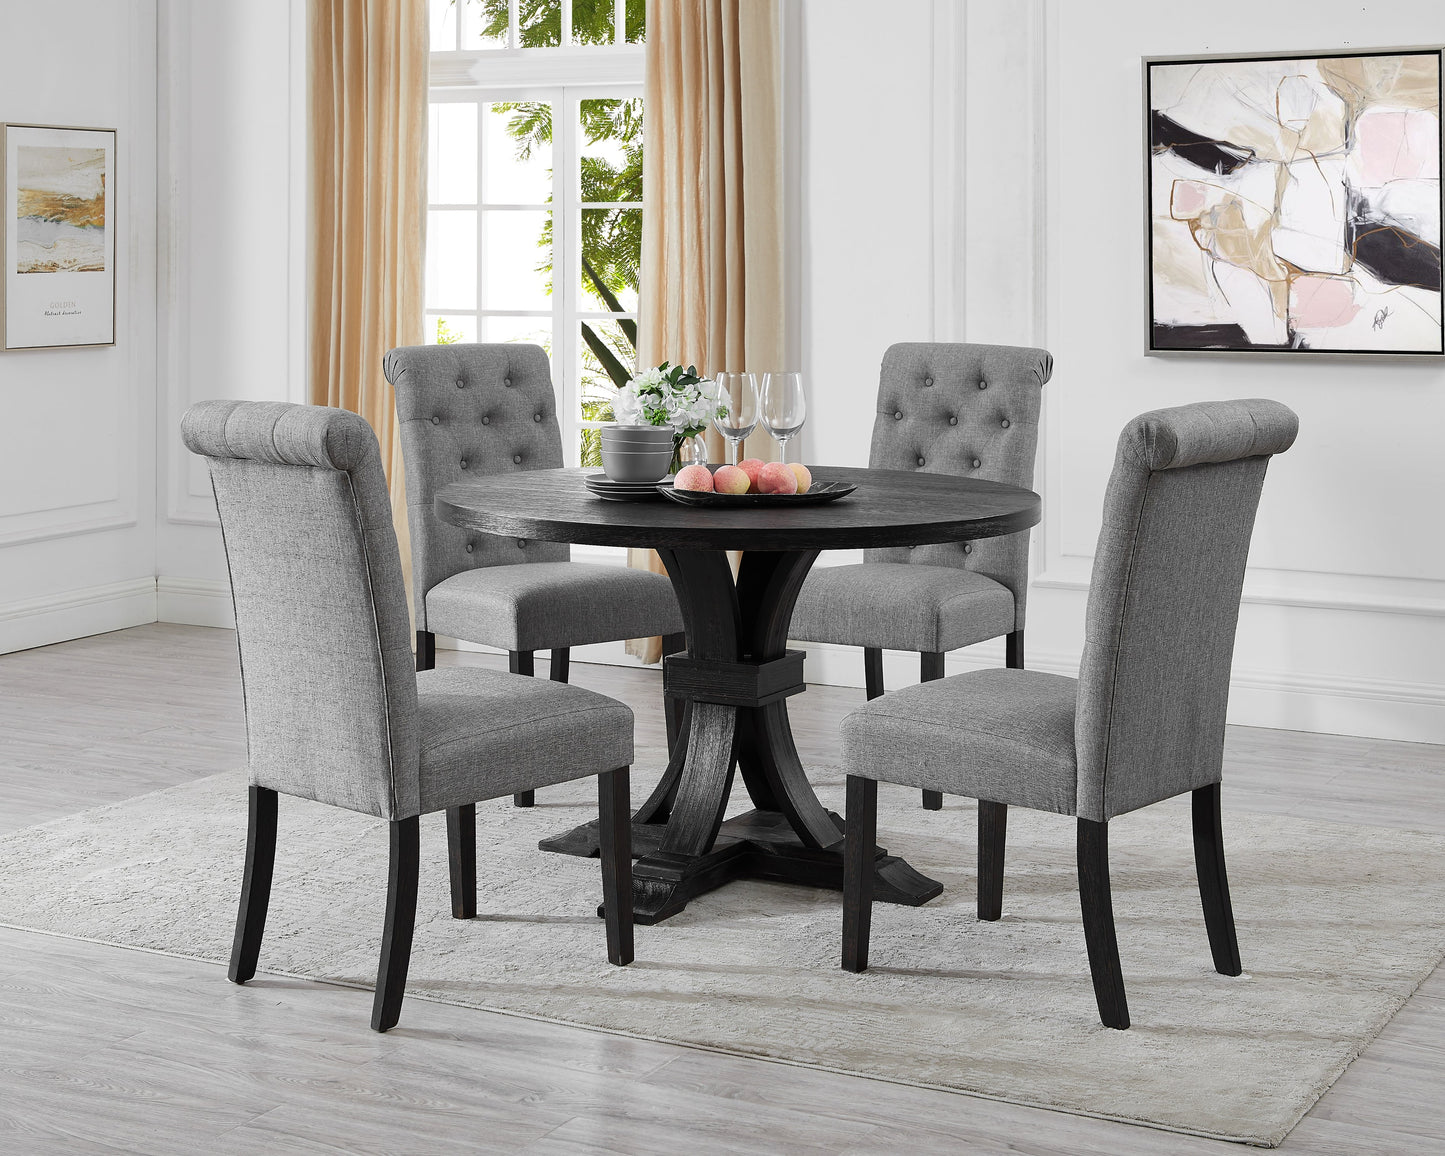 Siena Distressed Black Finish 5-Piece Dining set, Pedestal Round Table with Gray Upholstered Chairs